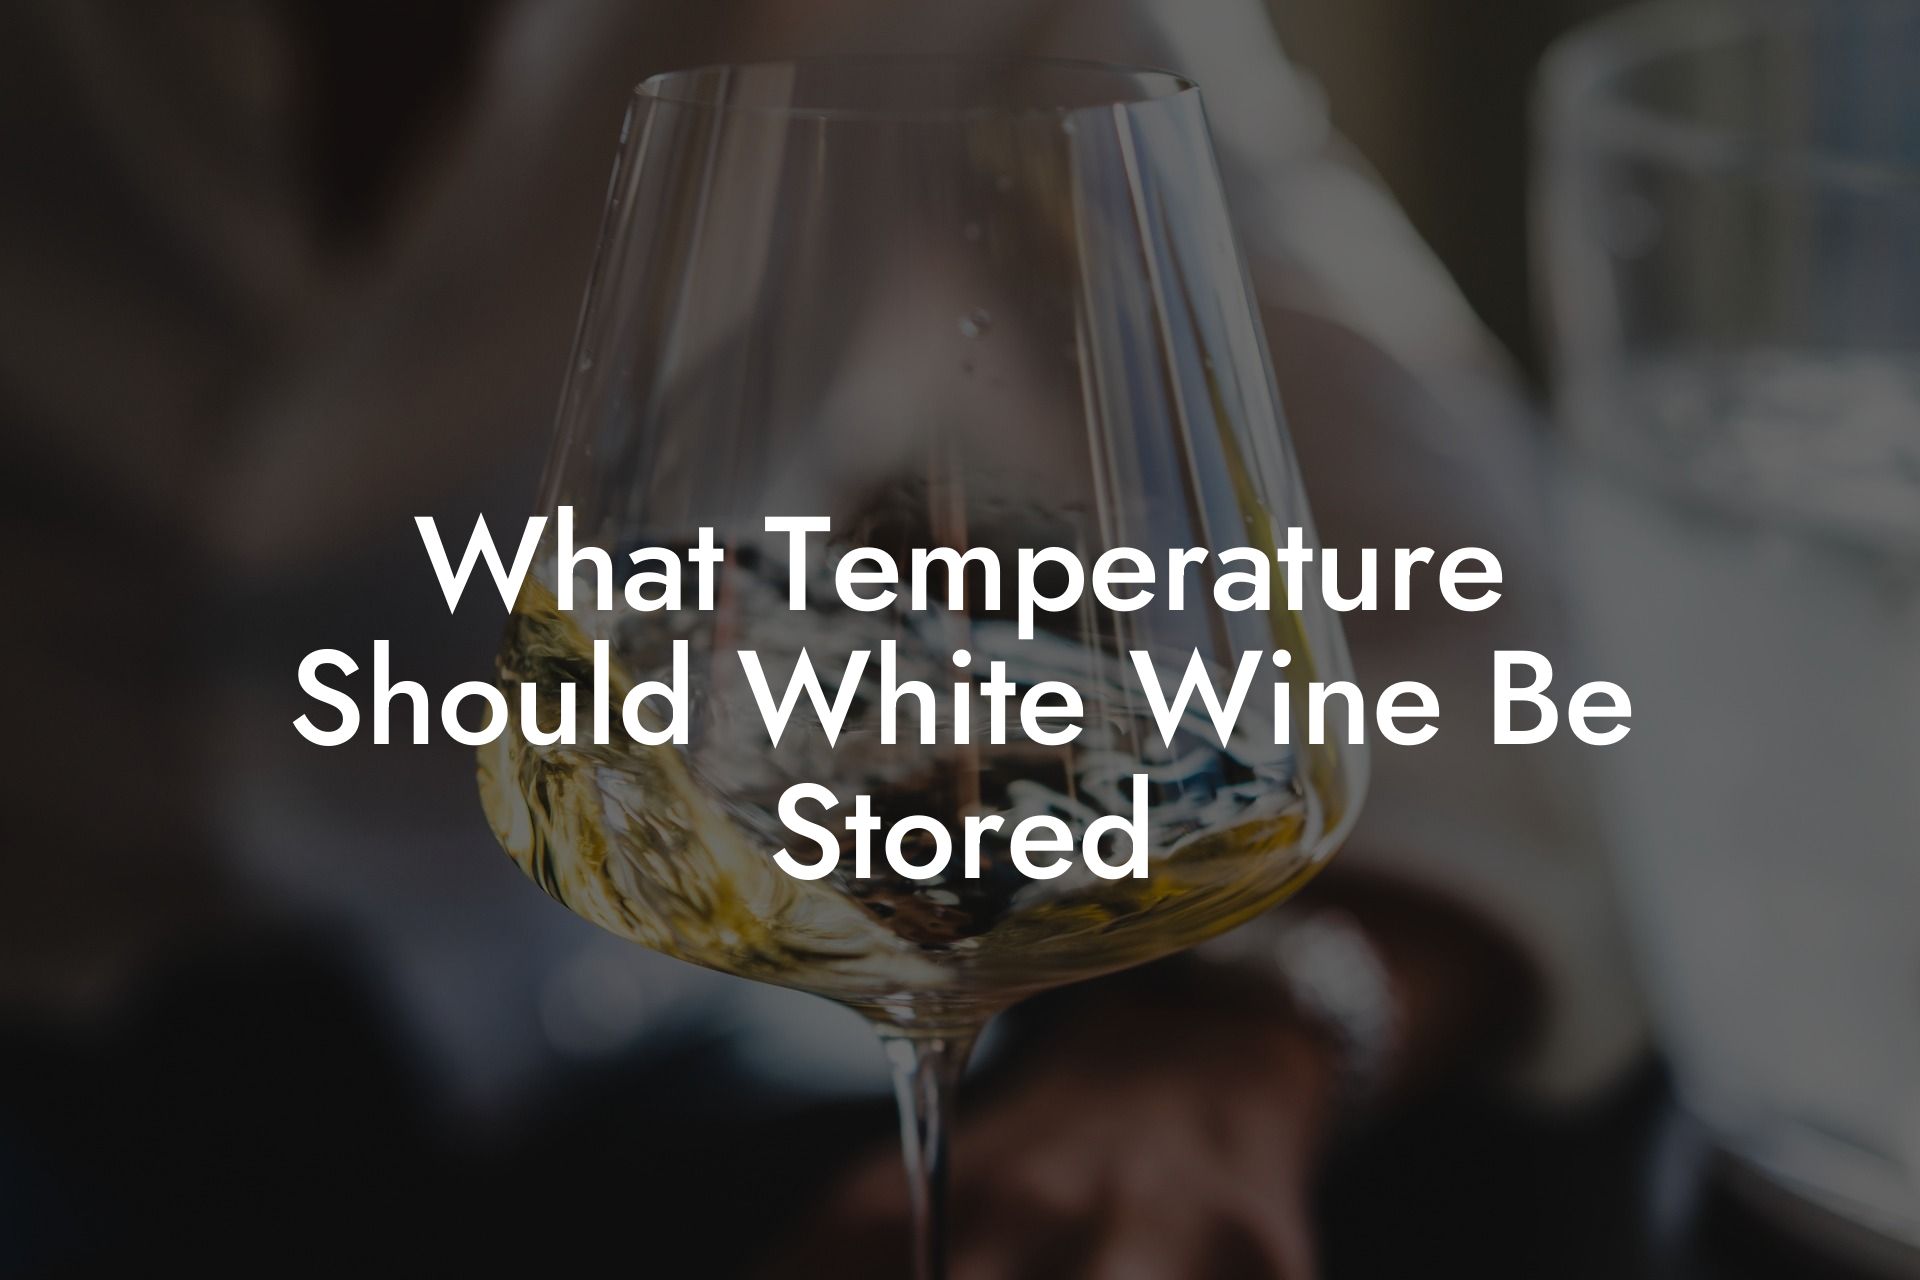 What Temperature Should White Wine Be Stored